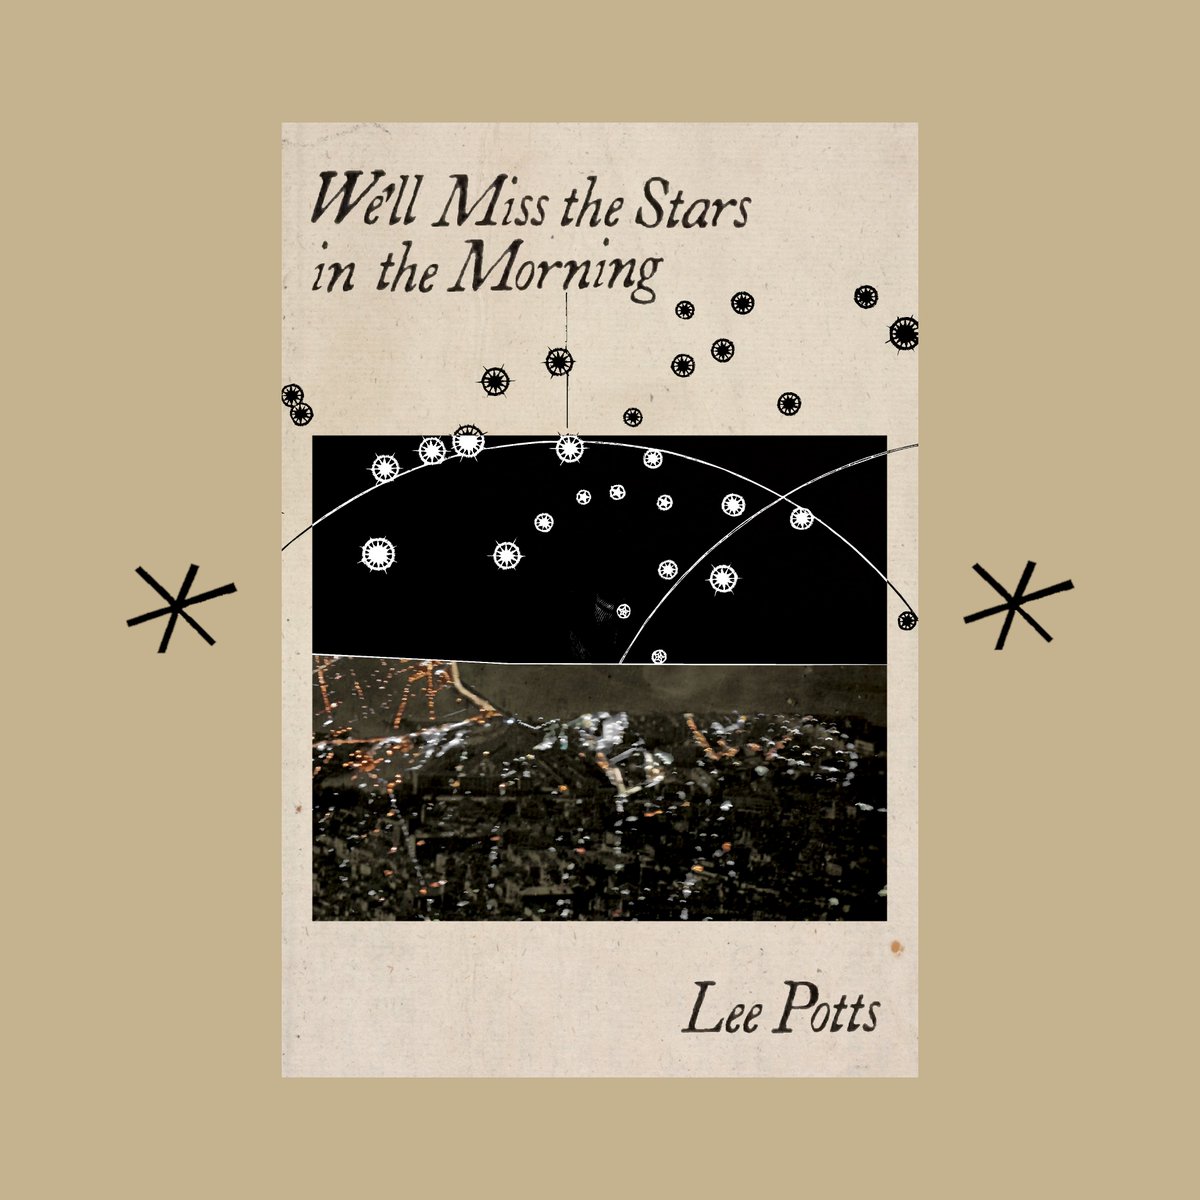 Hello Friends! I'm thrilled to announce that my second poetry chapbook, We'll Miss the Stars in the Morning, has just been released by Bottlecap Press. I think of it as a book about the ways our desires can both curse and bless us. You can order it here: bottlecap.press/products/stars